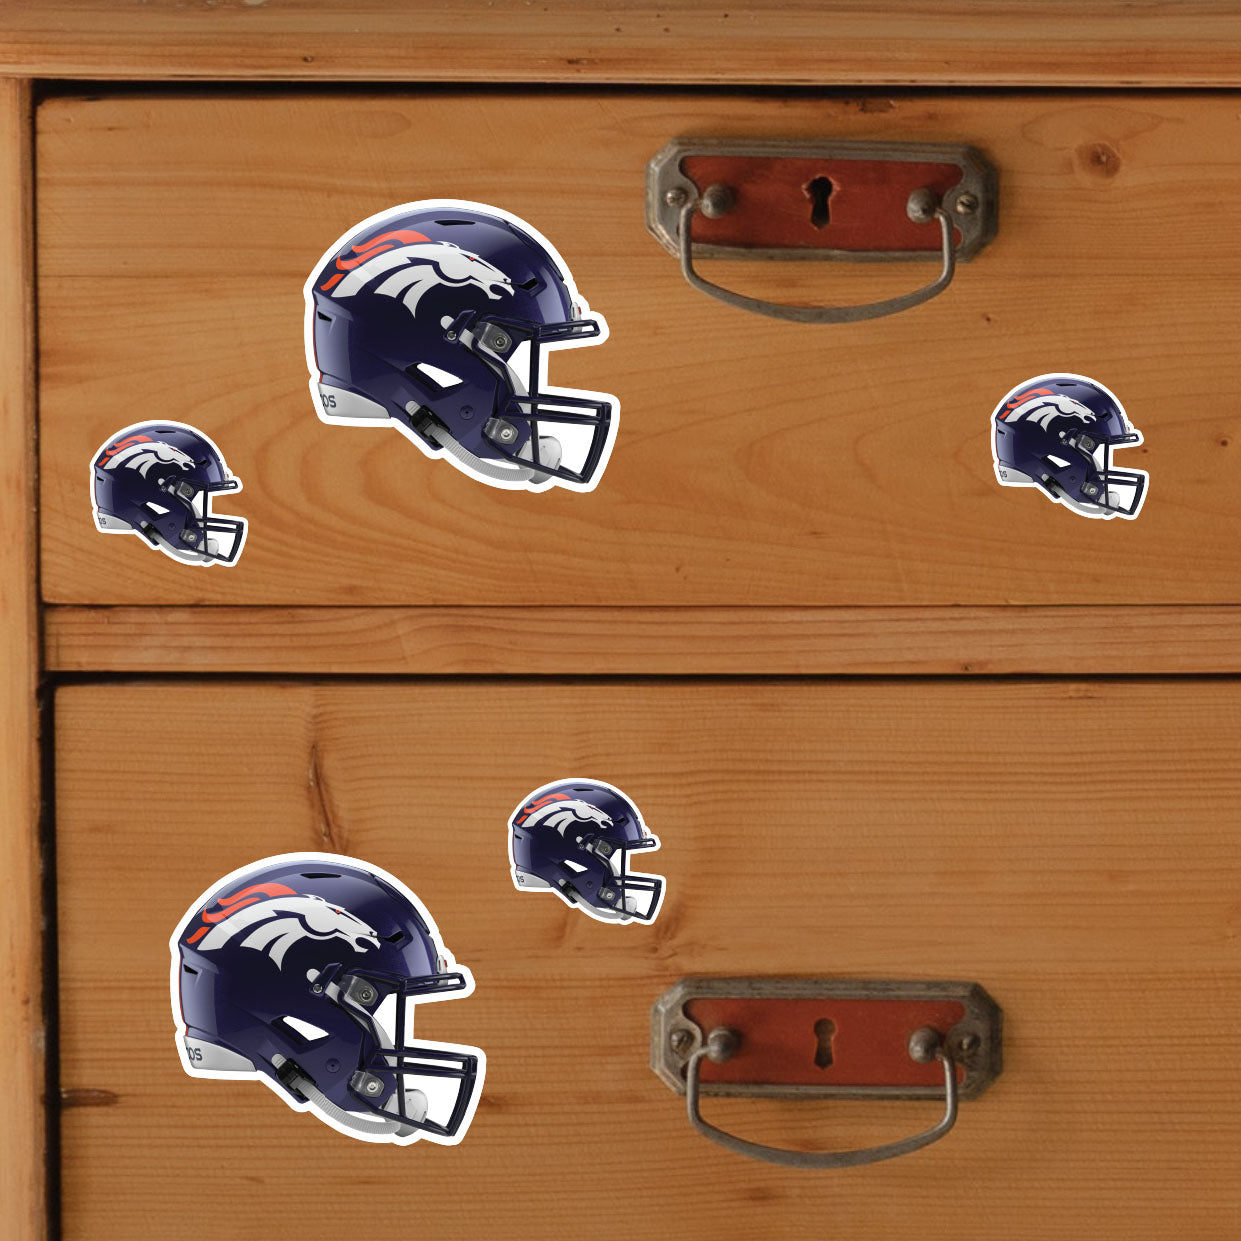 Denver Broncos: Helmet Minis - Officially Licensed NFL Removable Adhesive Decal